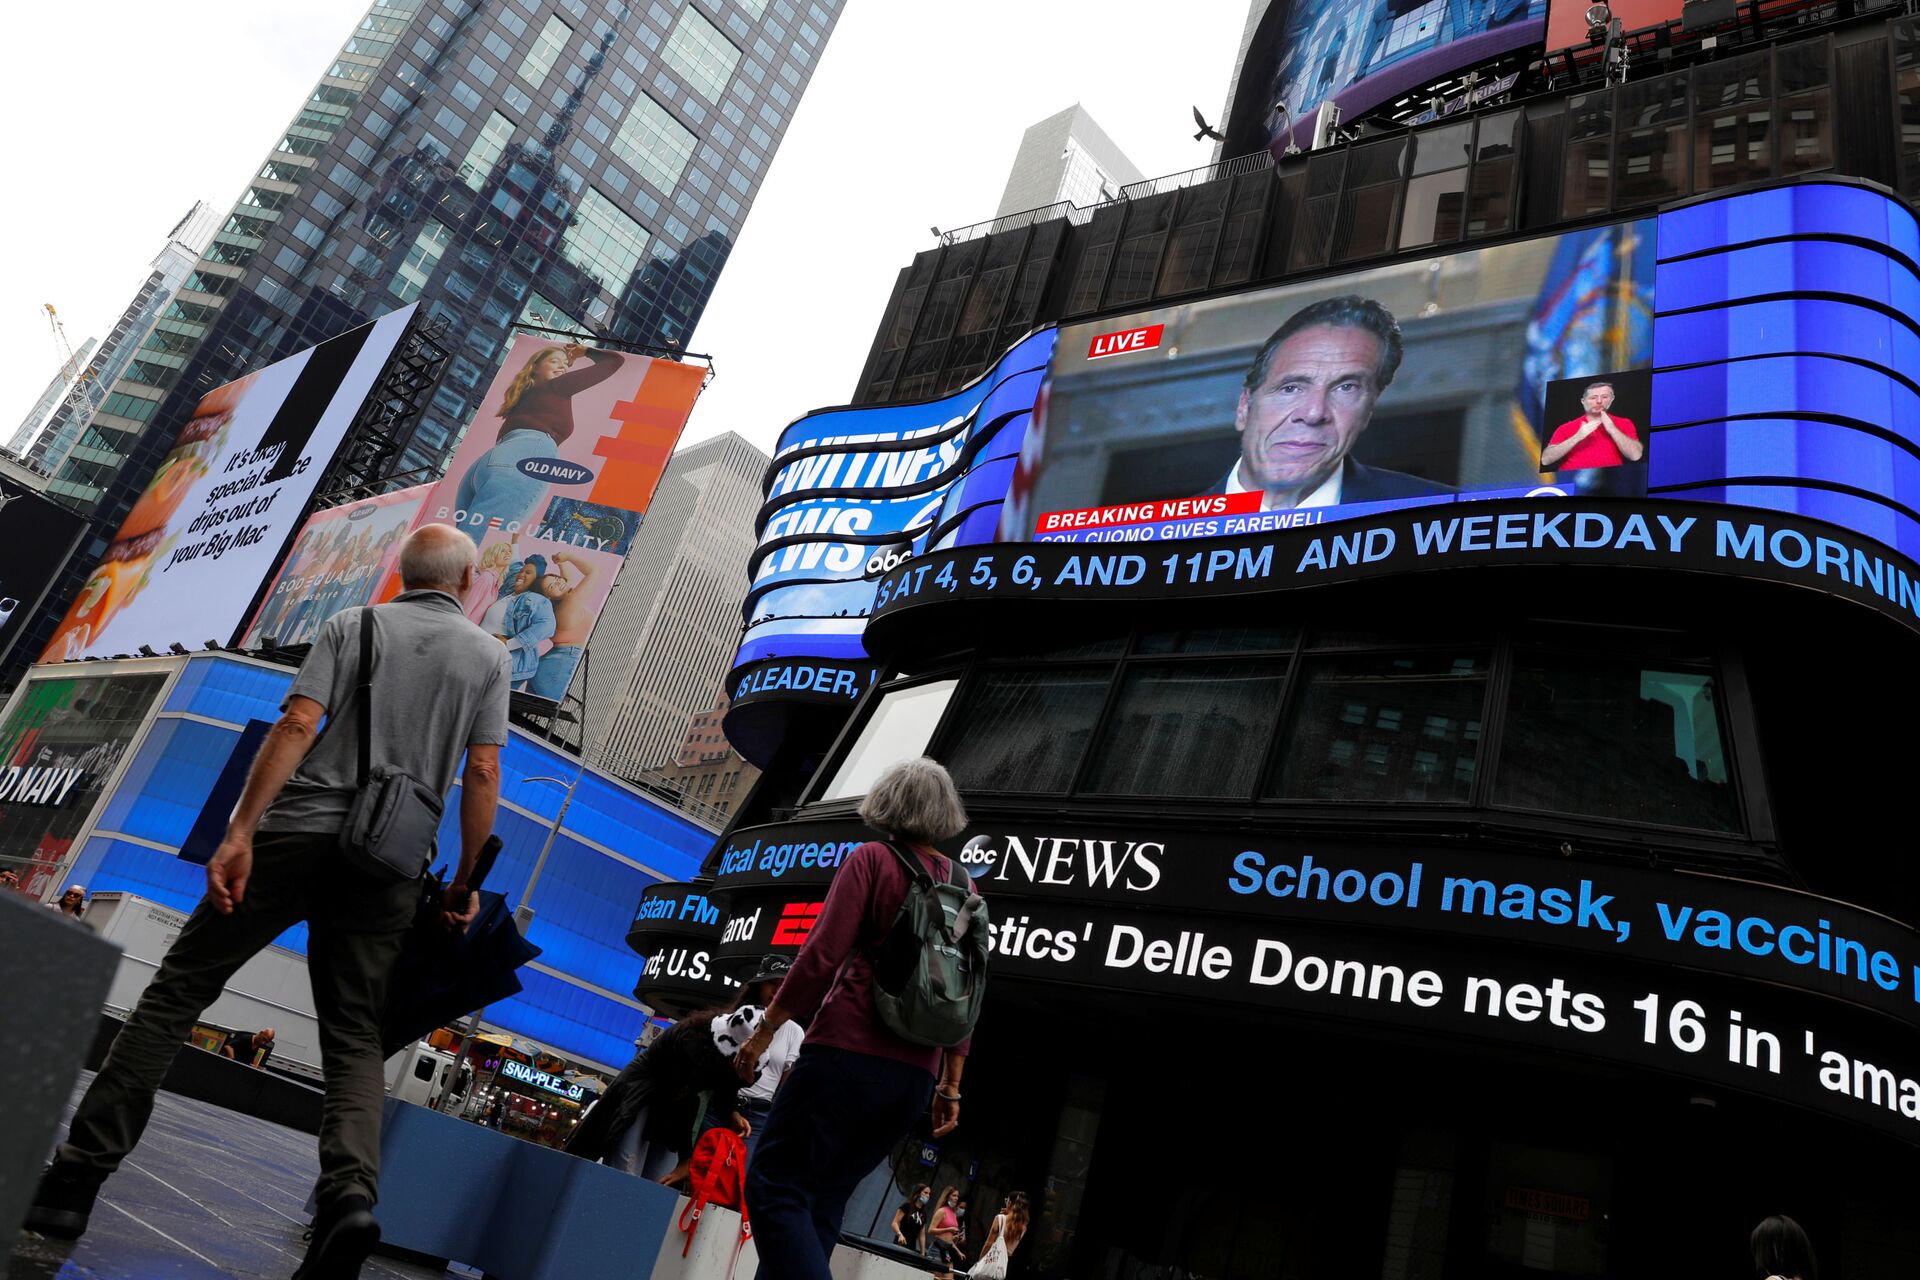 People walk by as a farewell speech by New York Governor Andrew Cuomo is broadcast live on a screen in Times Square on his final day in office in Manhattan, New York City, US, August 23, 2021 - Sputnik International, 1920, 16.11.2021